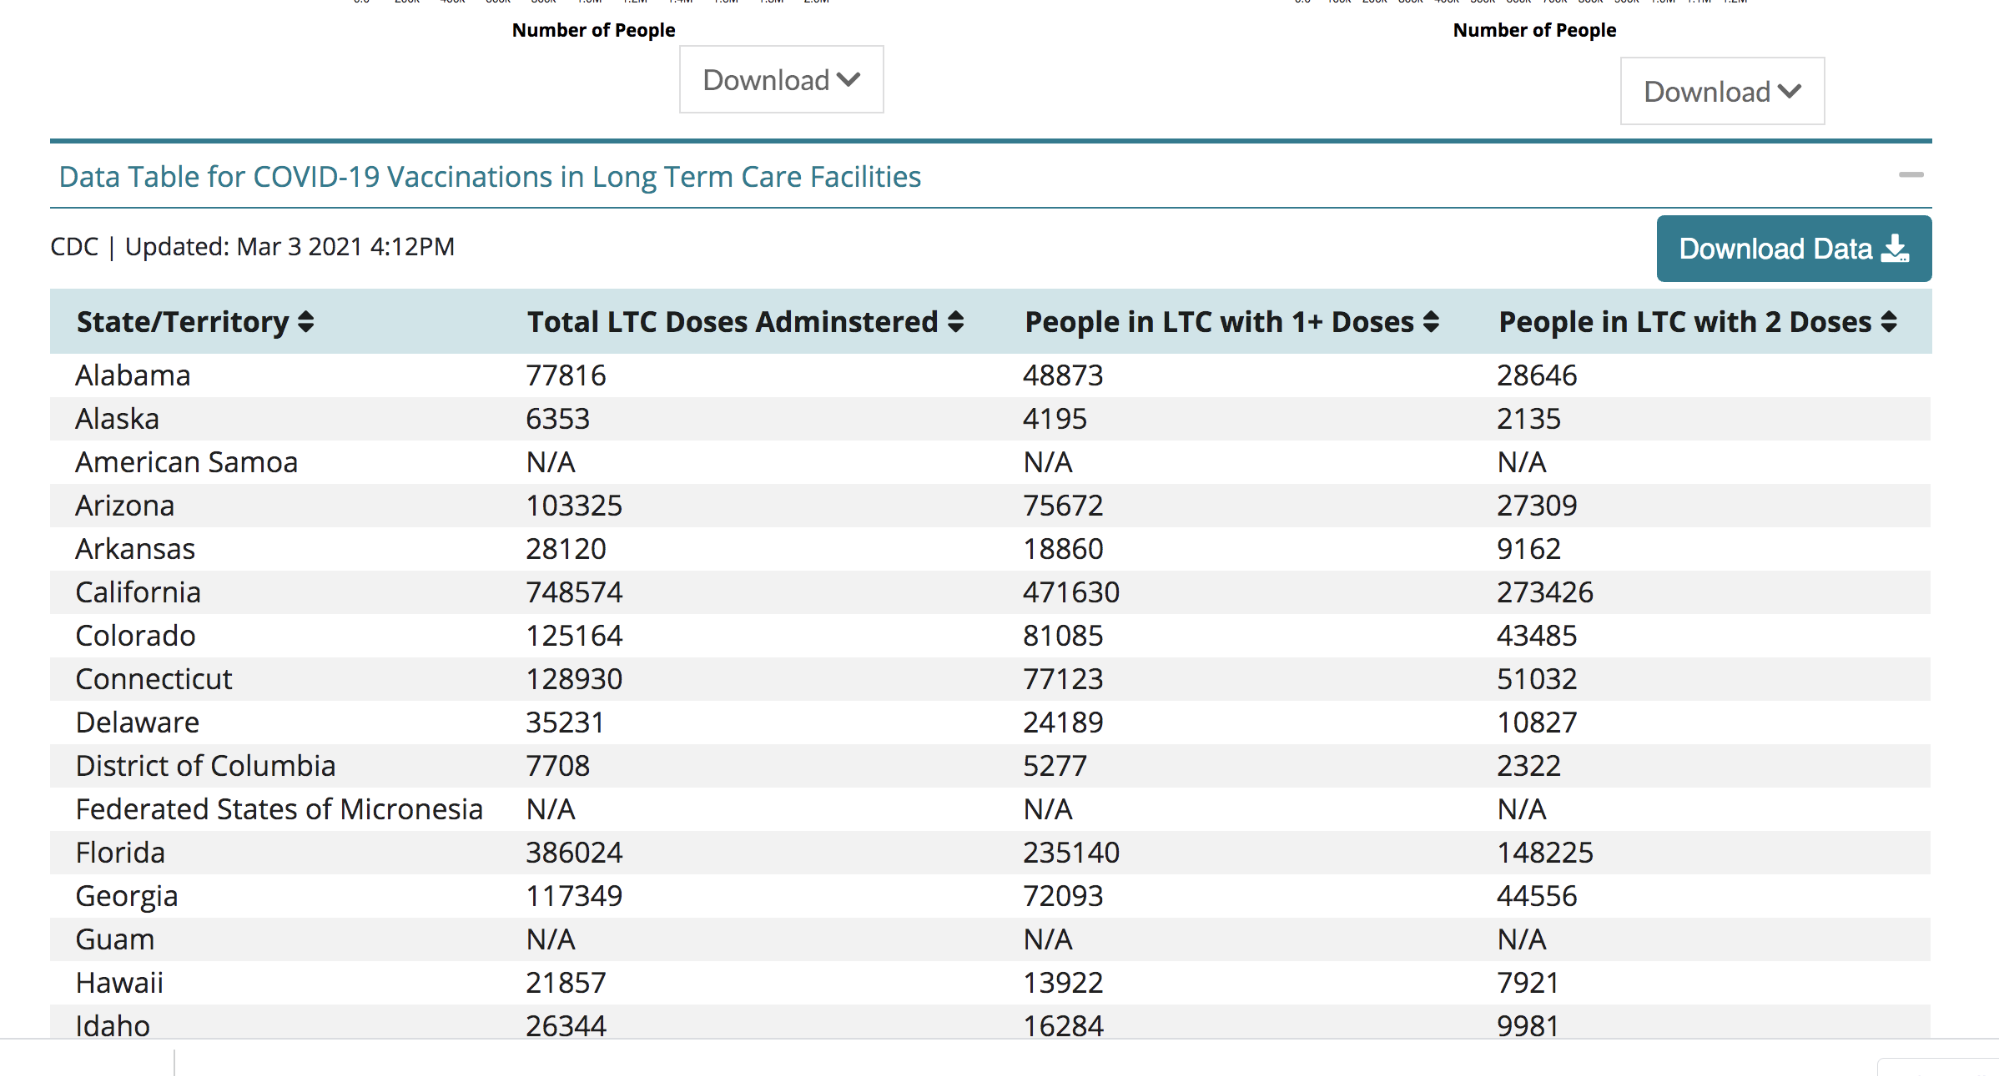 Screenshot of the COVID-19 vaccination data table for Long-Term-Care facilities located on the CDC website.